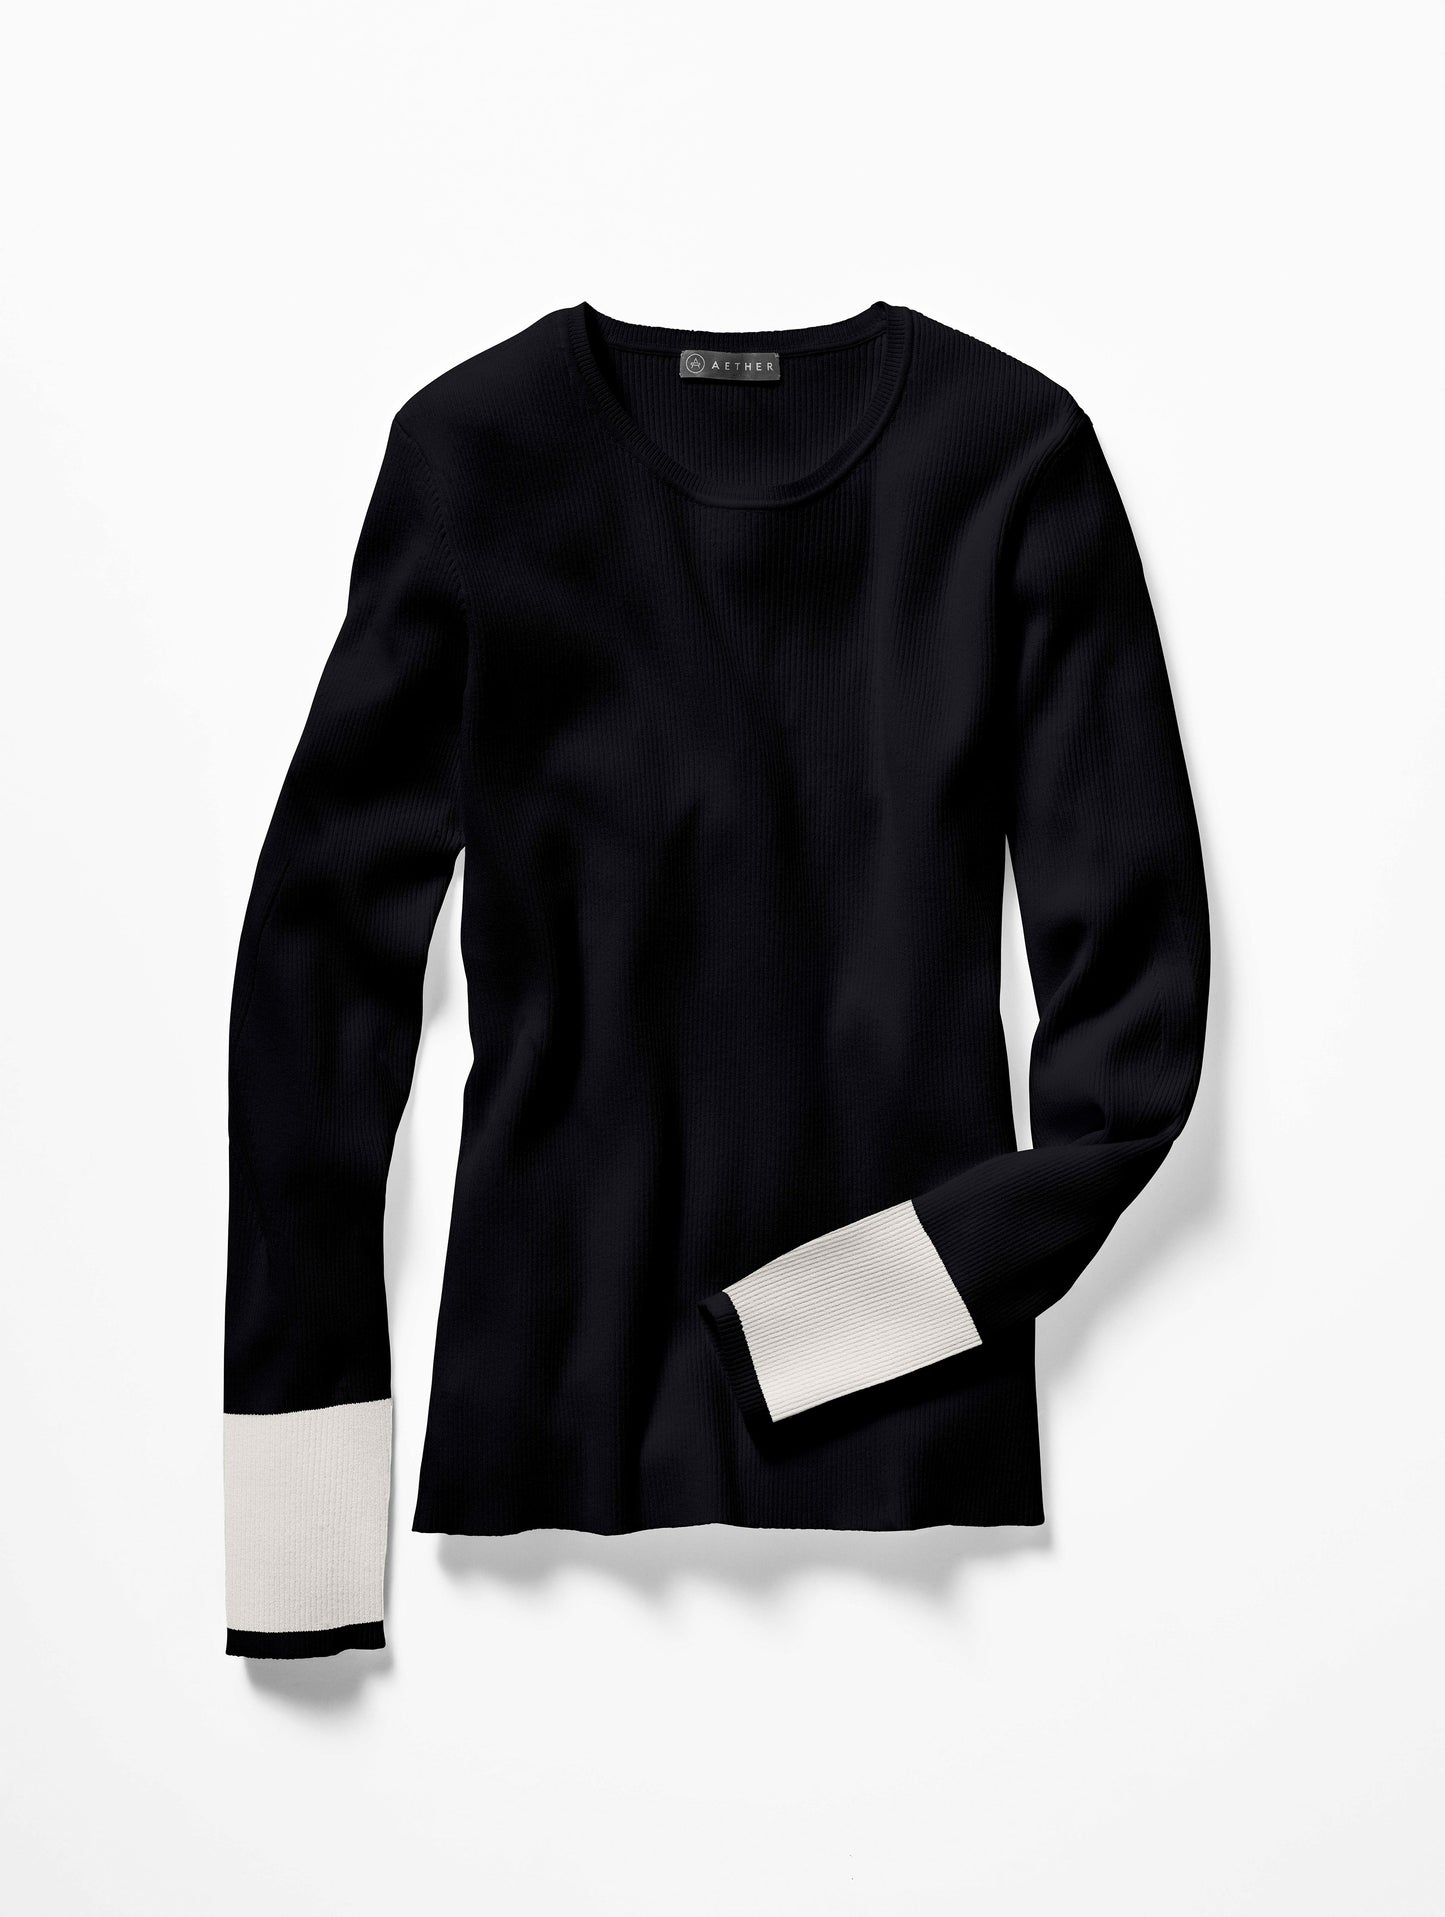 black sweater for women from Aether Apparel